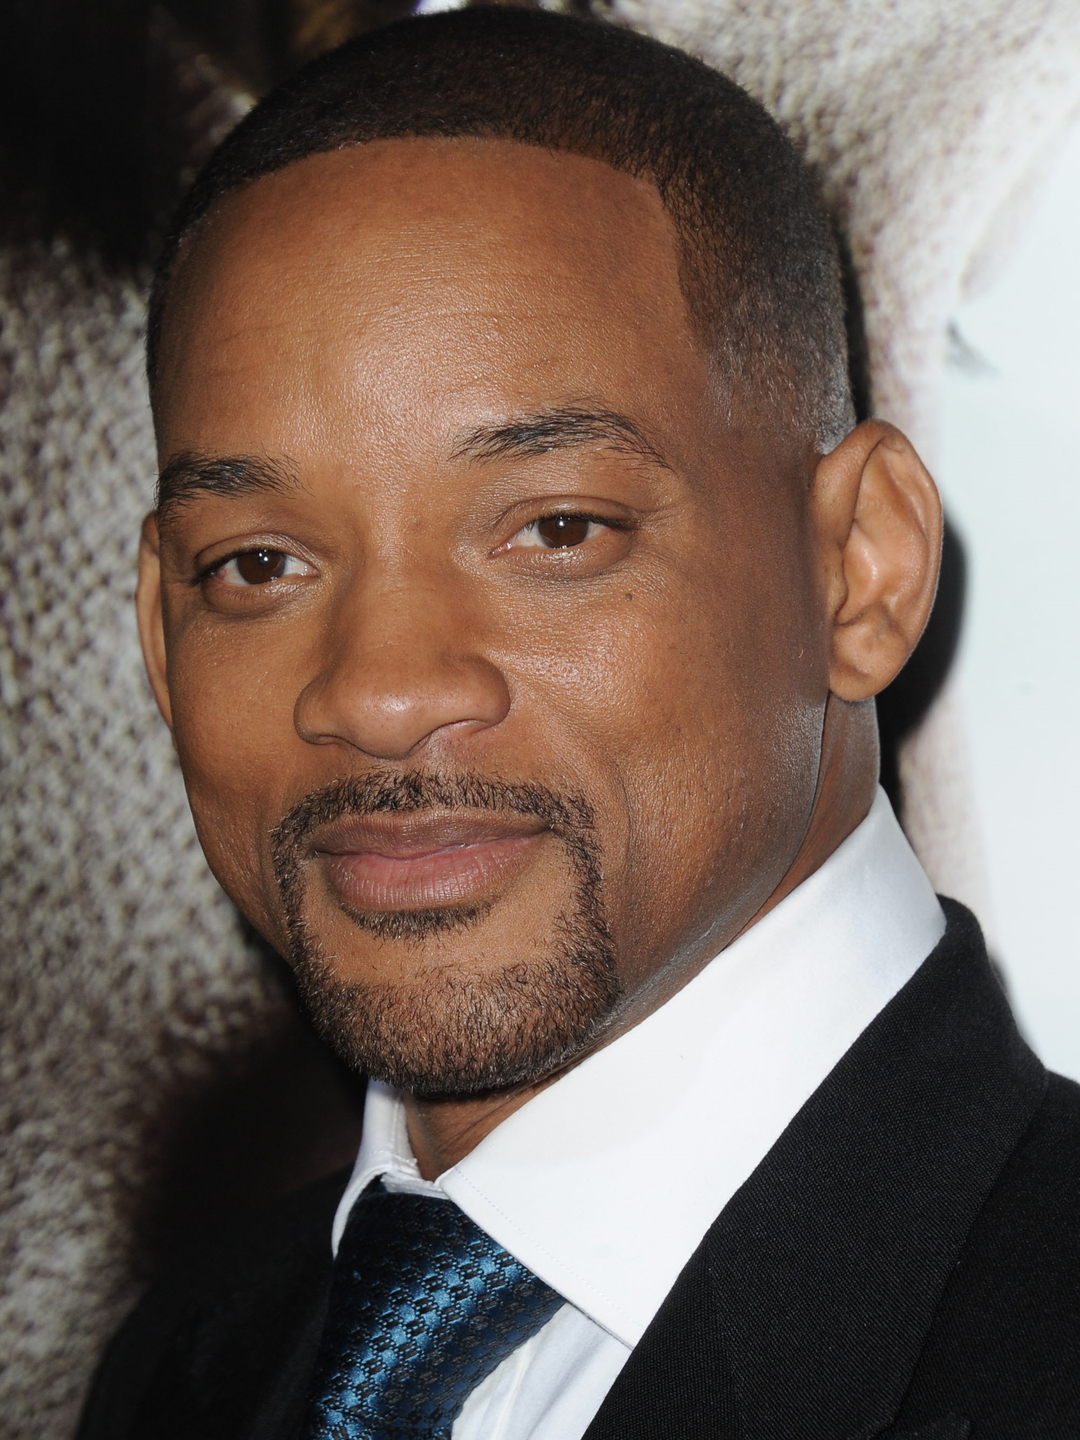 Will Smith who is his mother